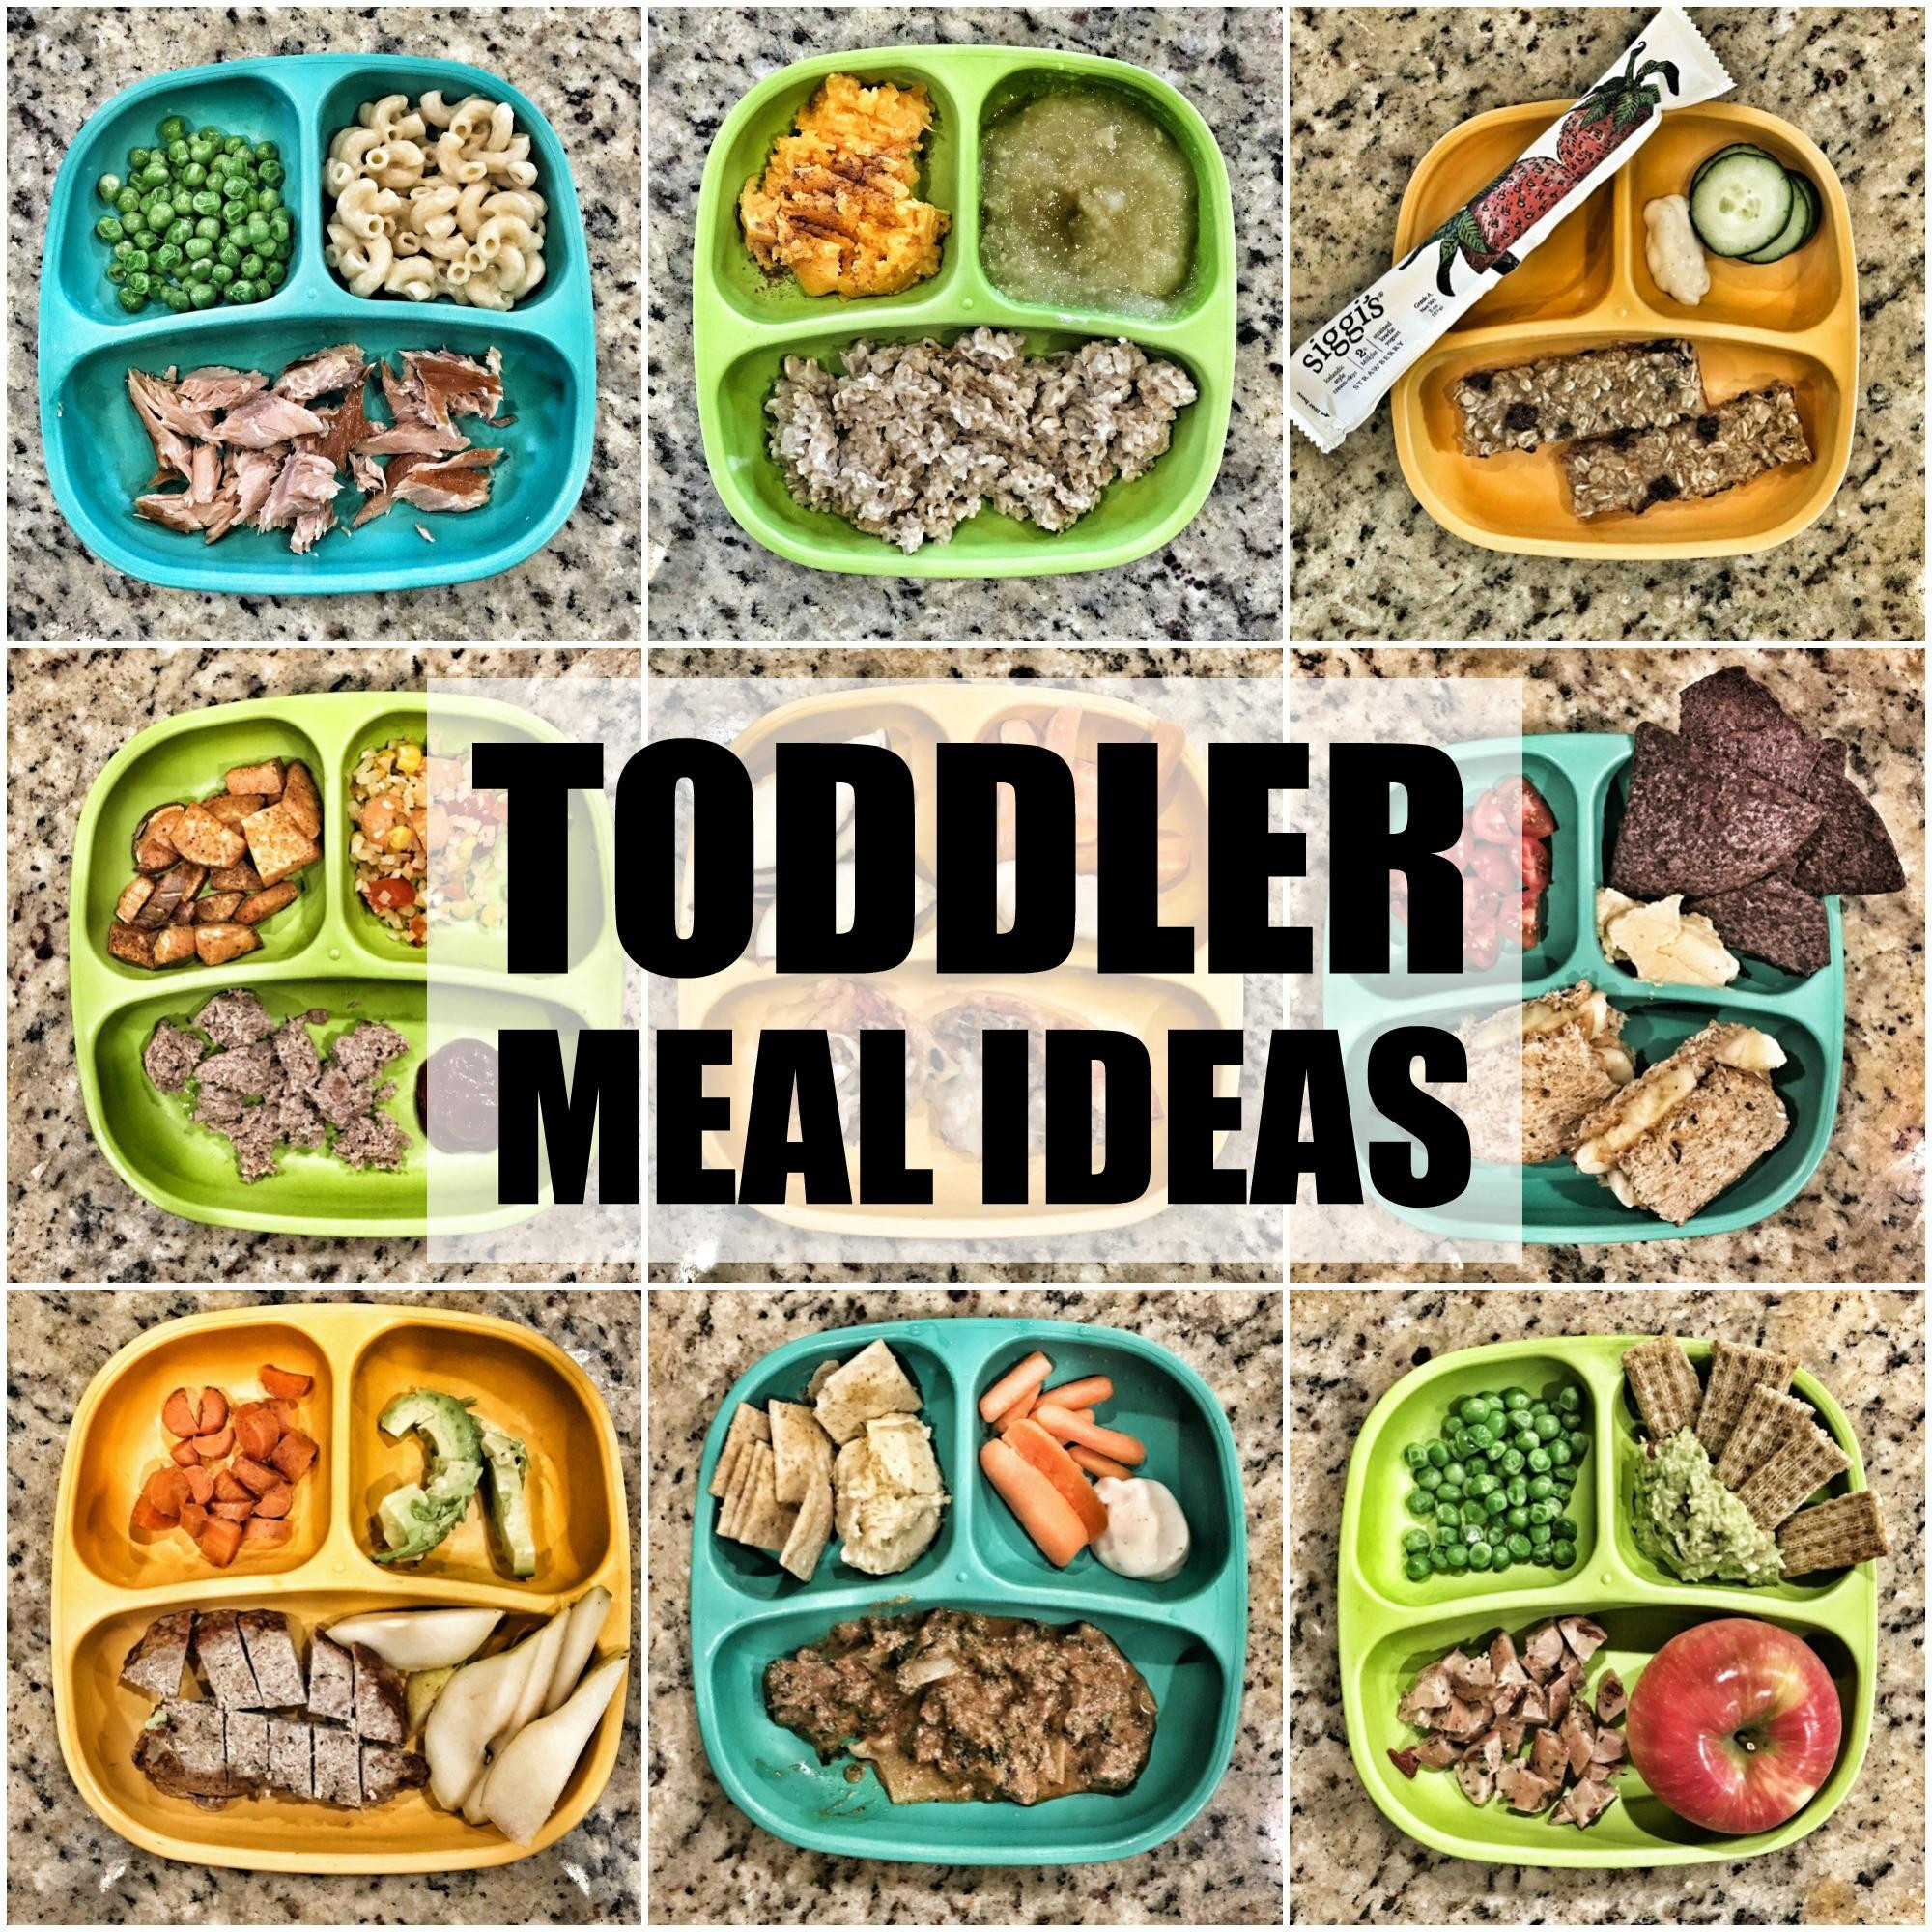 Dinner Ideas For Friends Coming Over
 50 Quick Toddler Meal Ideas